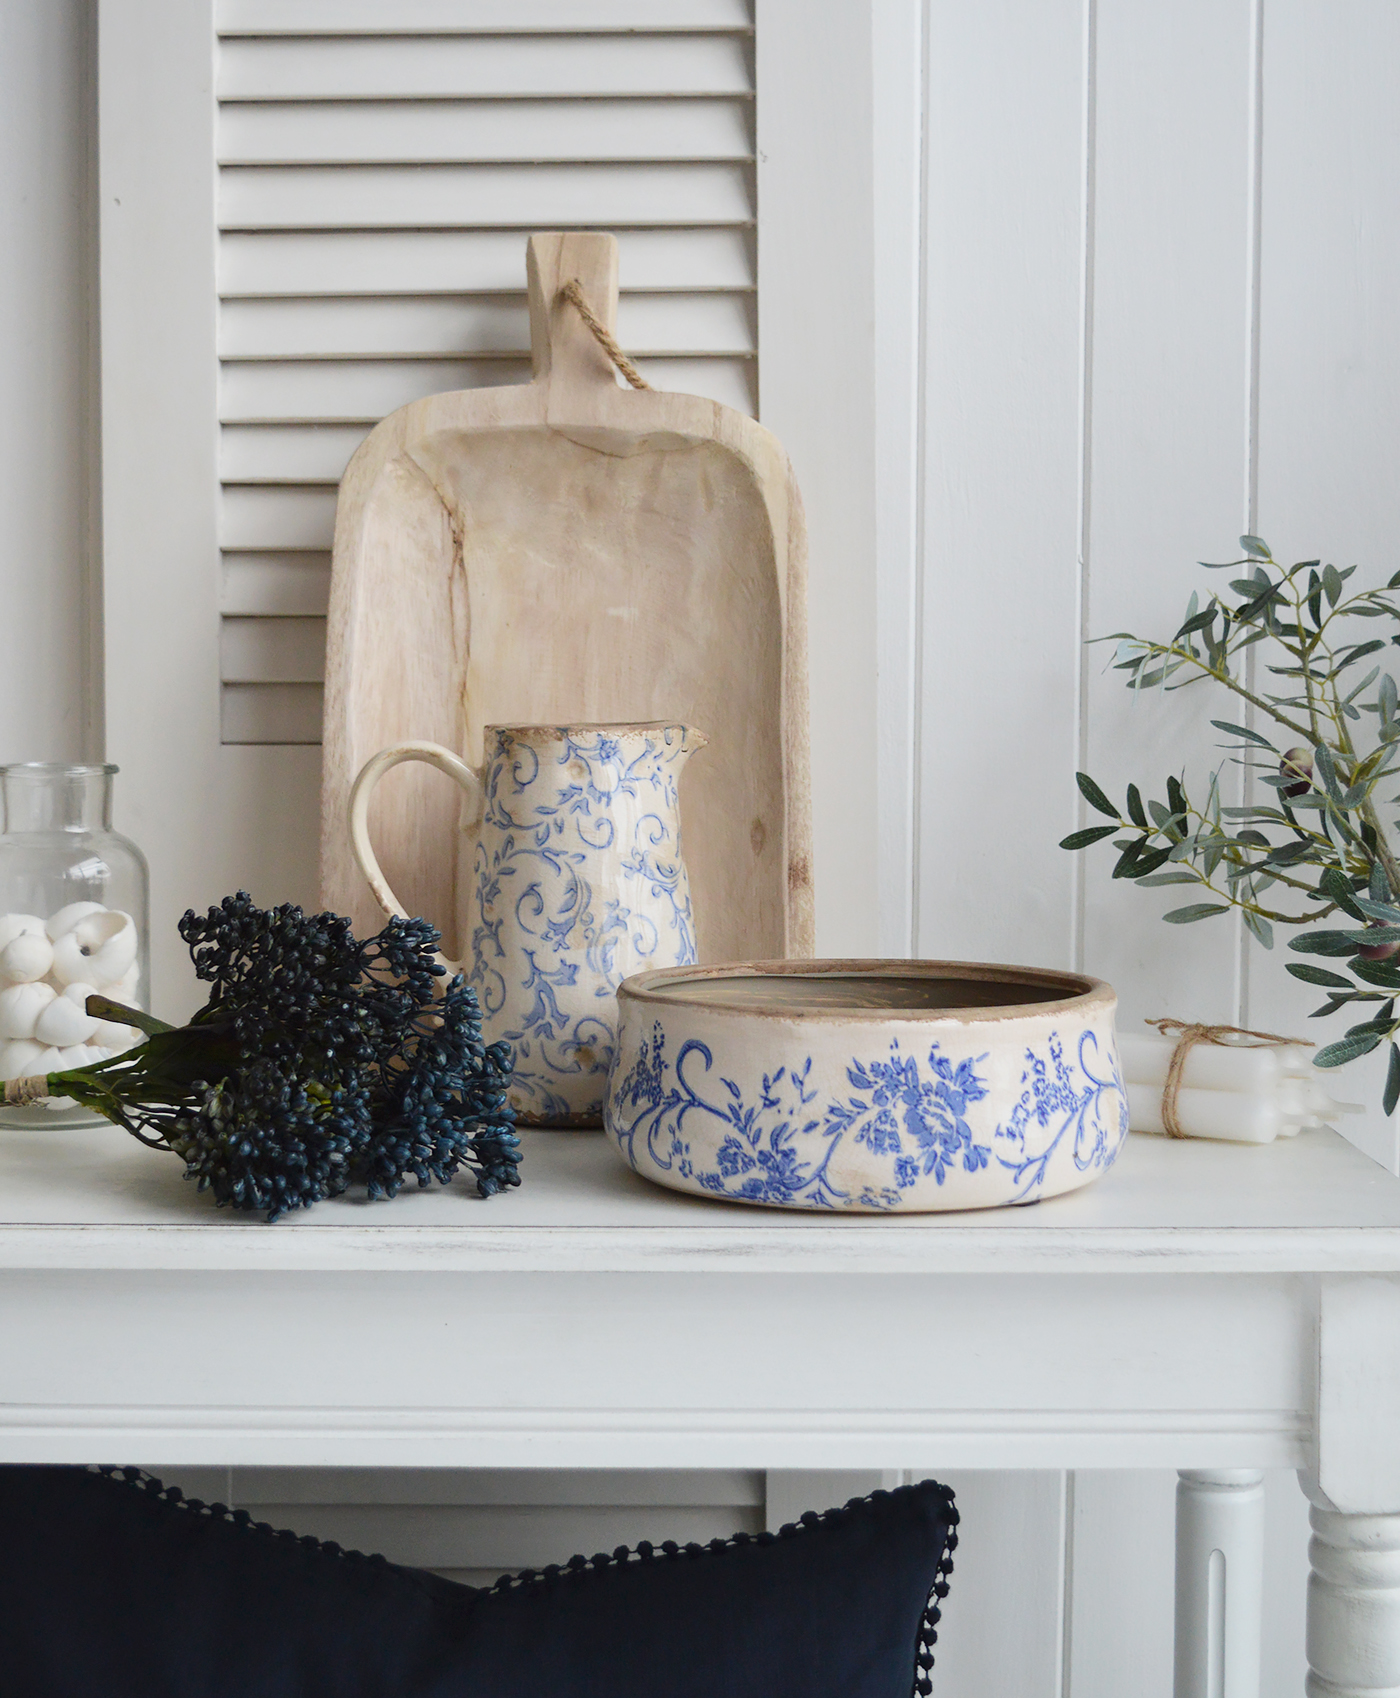 Prospect vintage ceramic low pots. Blue and white home decor for New England Style interiors for coastal, country and city home interiors from The White Lighthouse